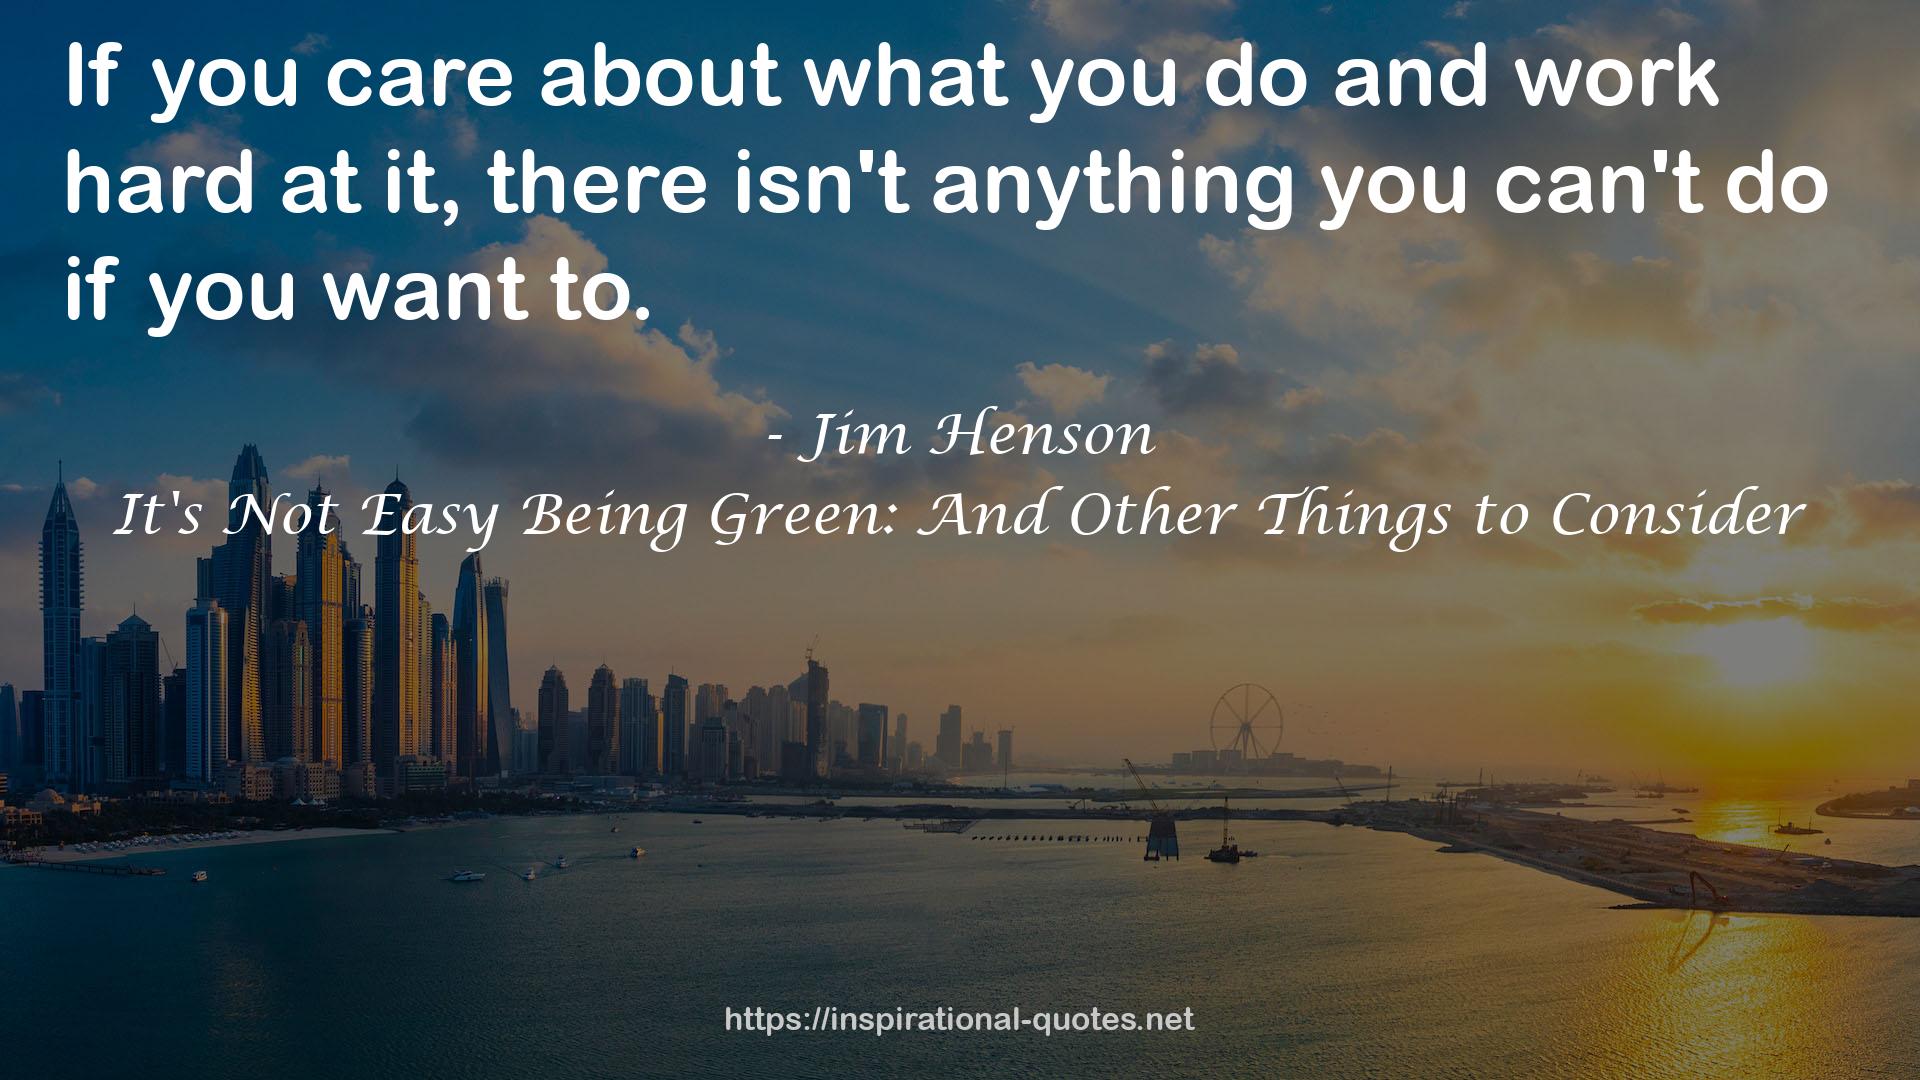 It's Not Easy Being Green: And Other Things to Consider QUOTES